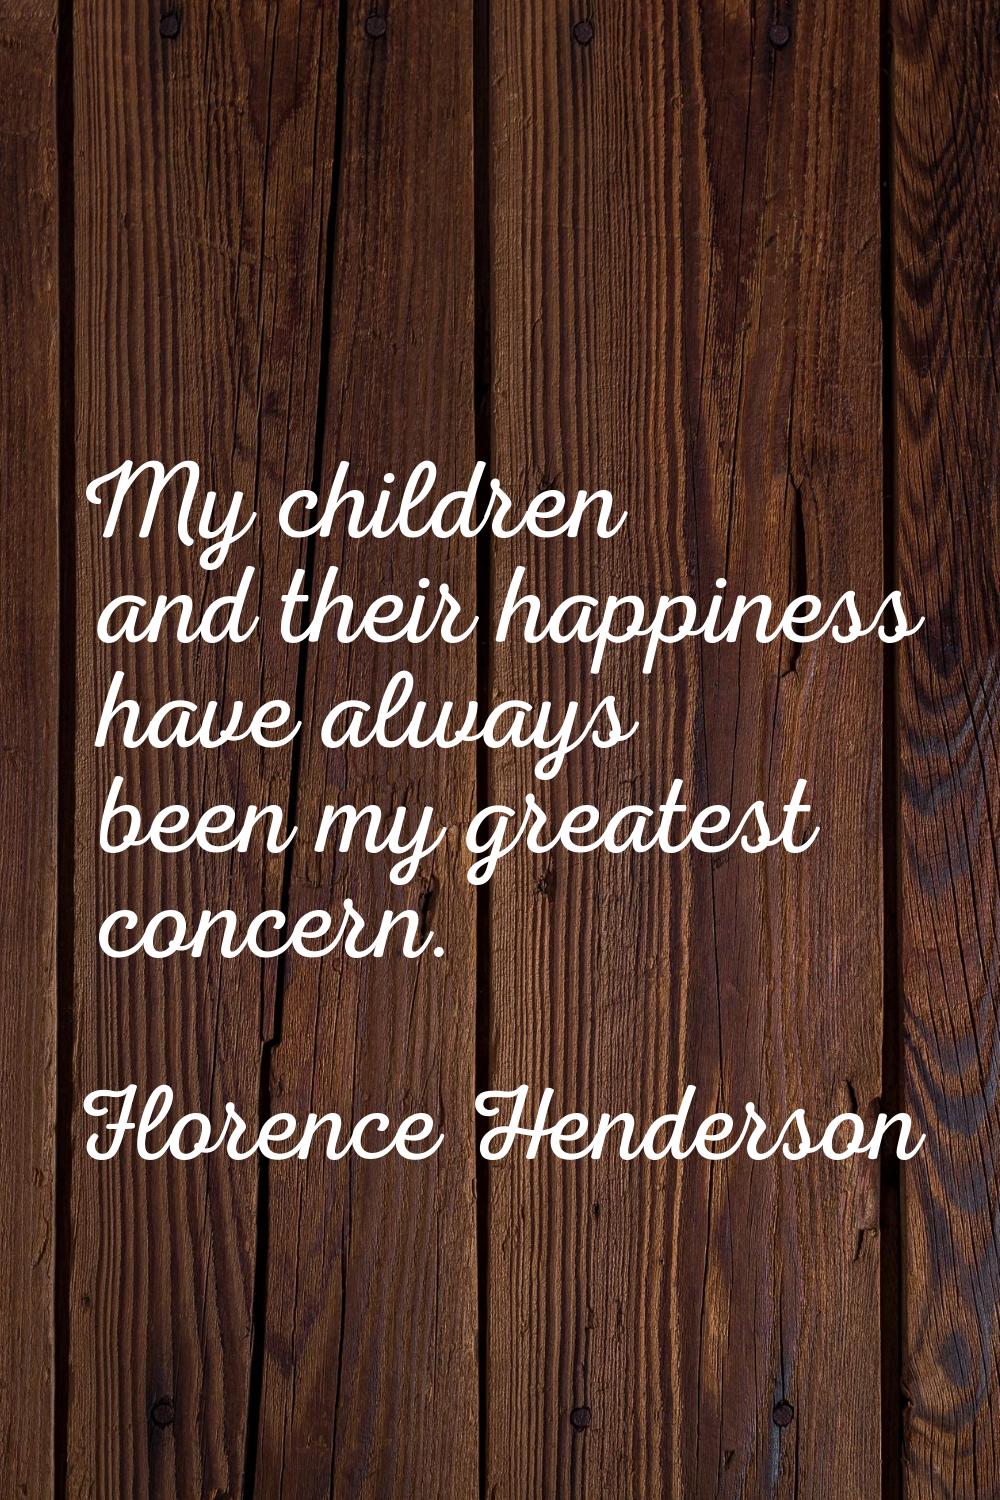 My children and their happiness have always been my greatest concern.